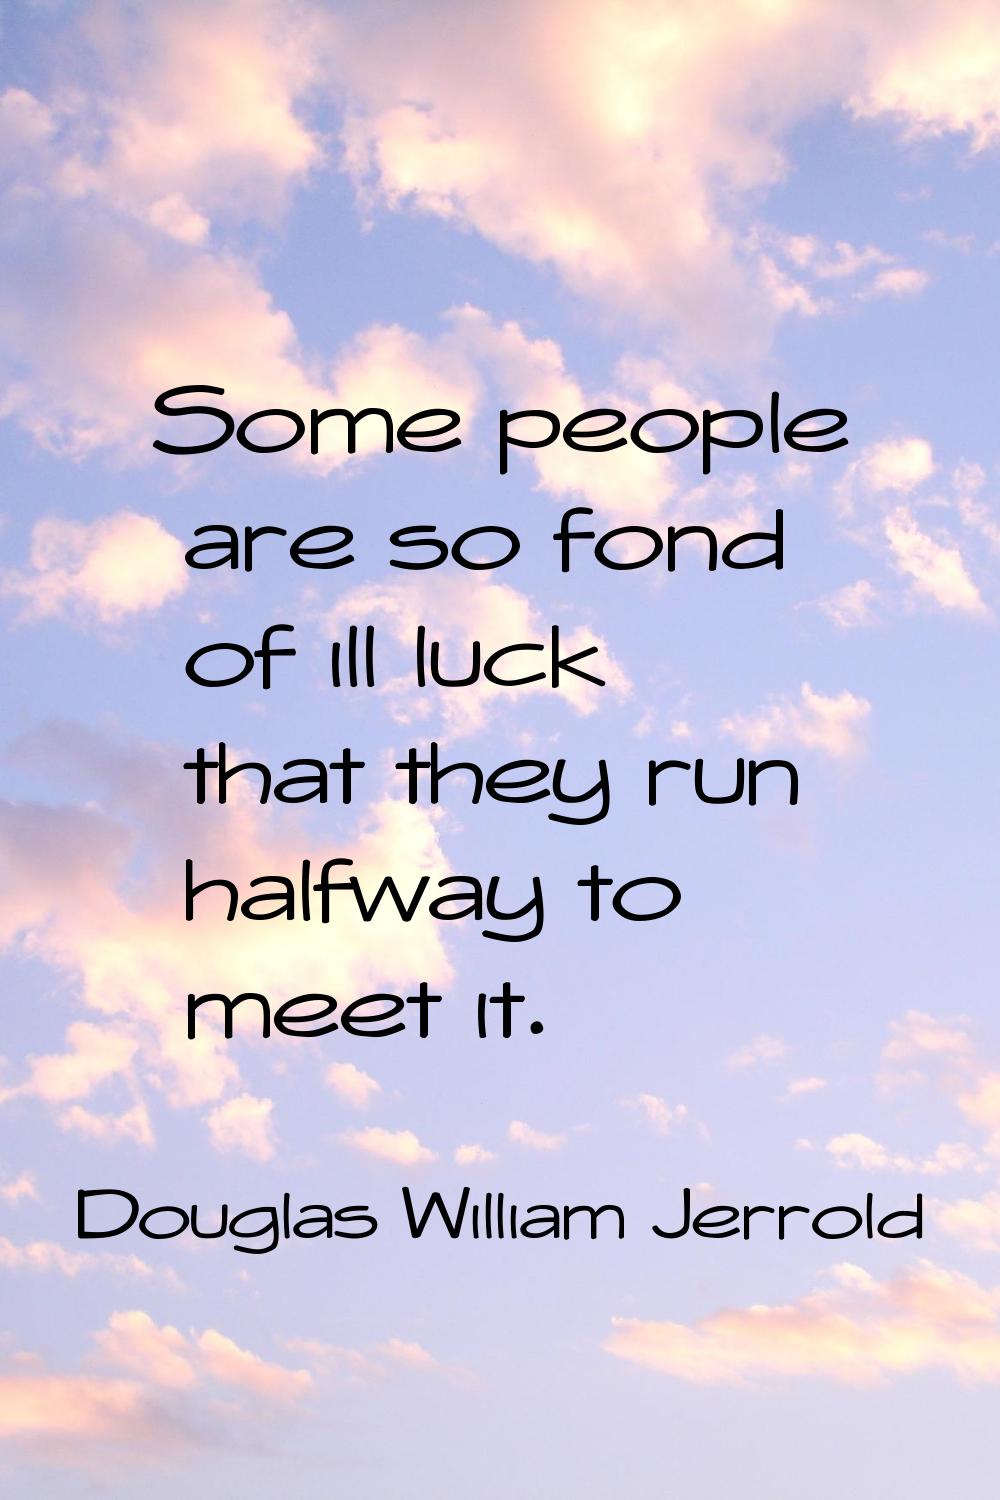 Some people are so fond of ill luck that they run halfway to meet it.